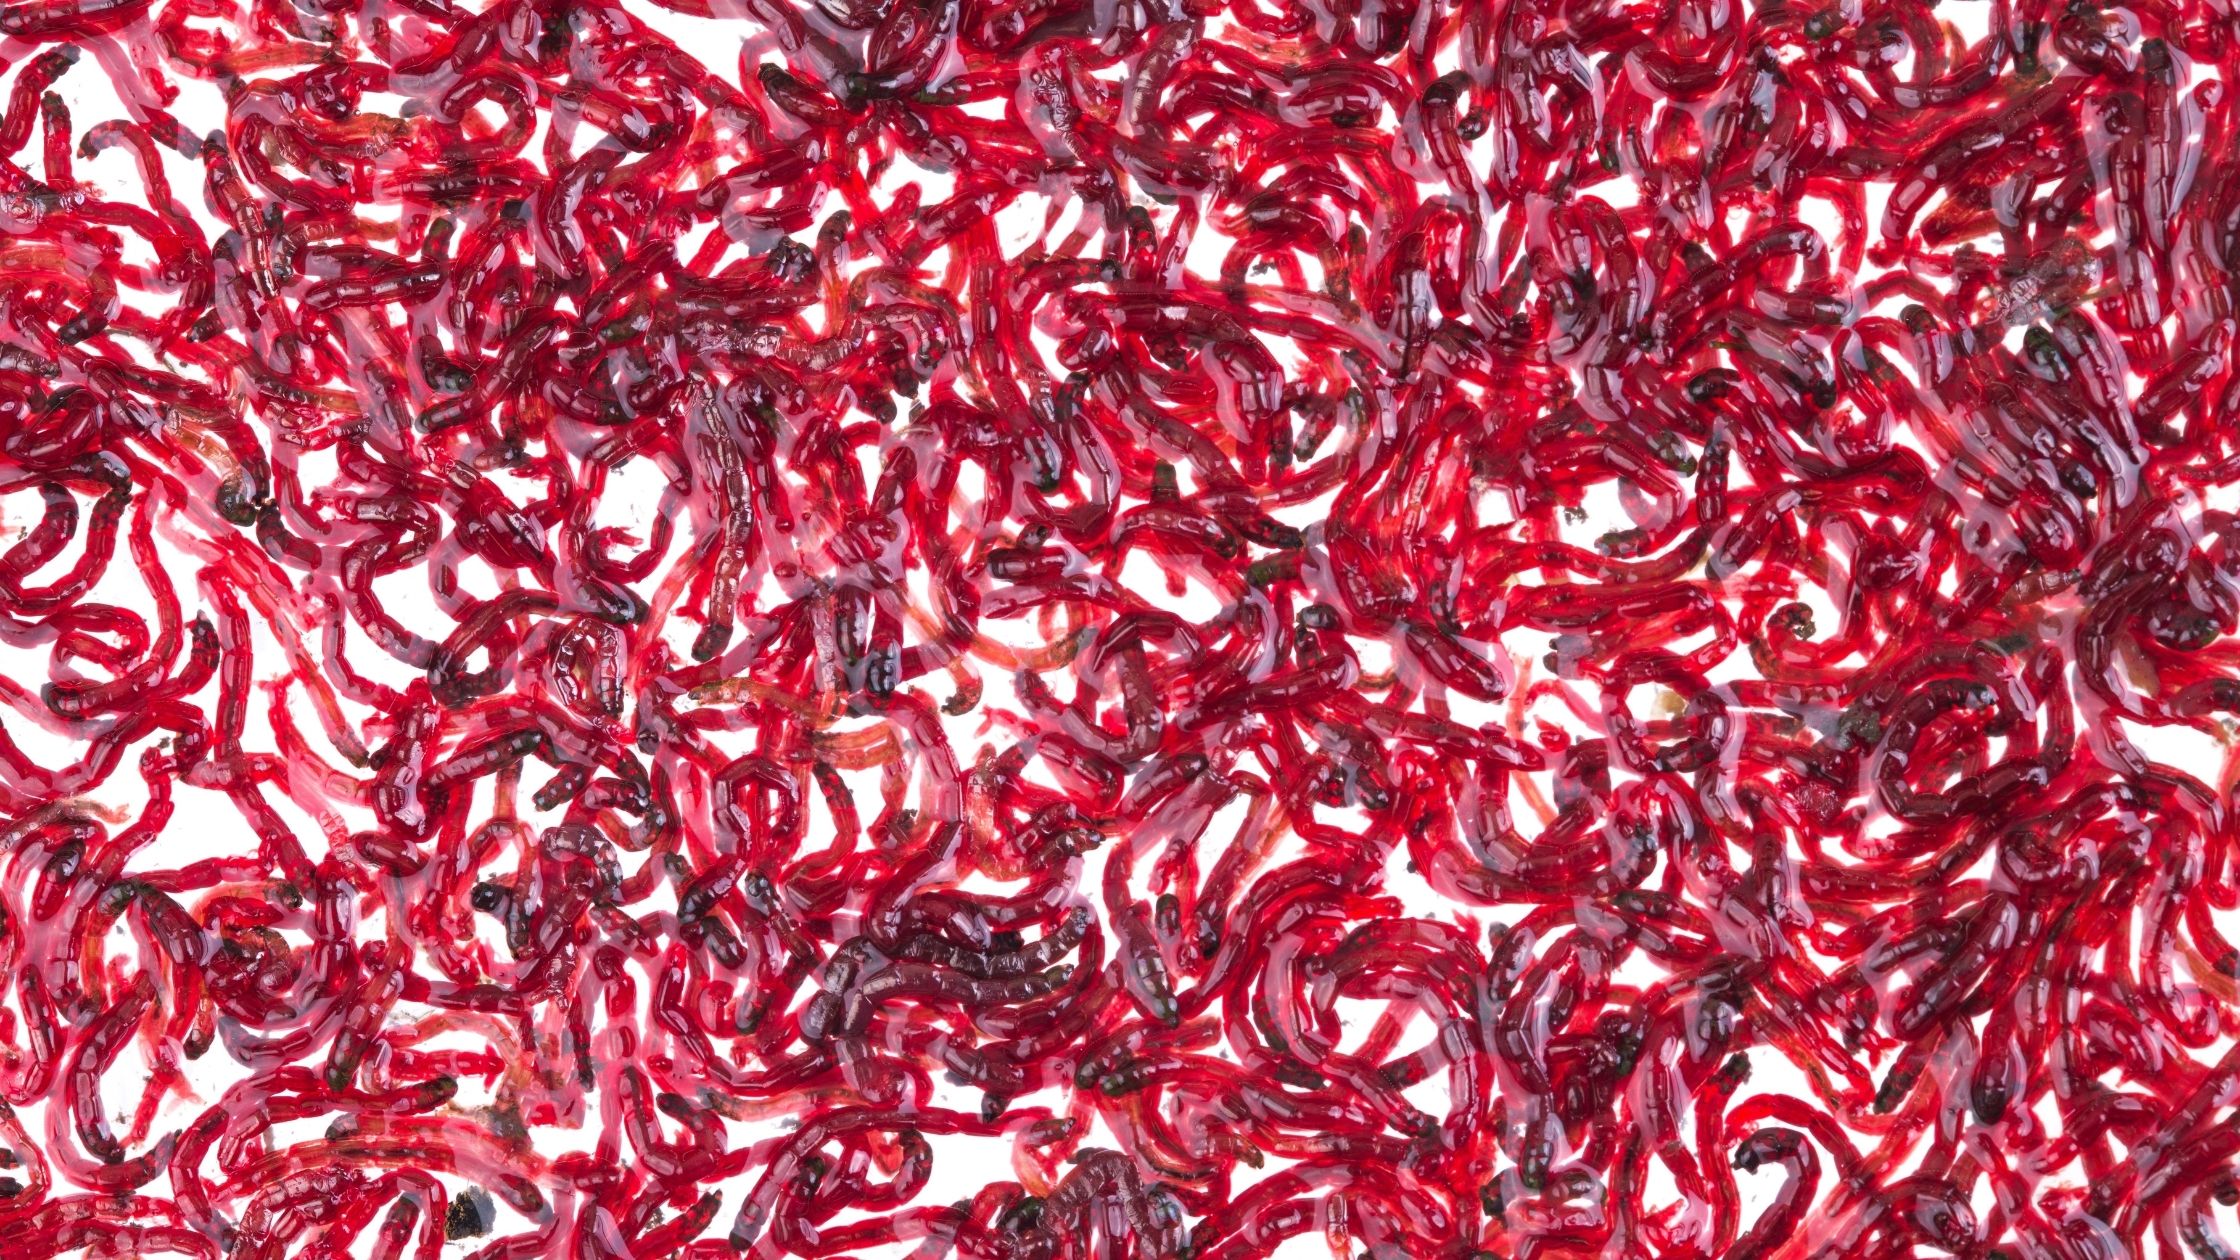 Types of Fishing Worms: Bloodworms